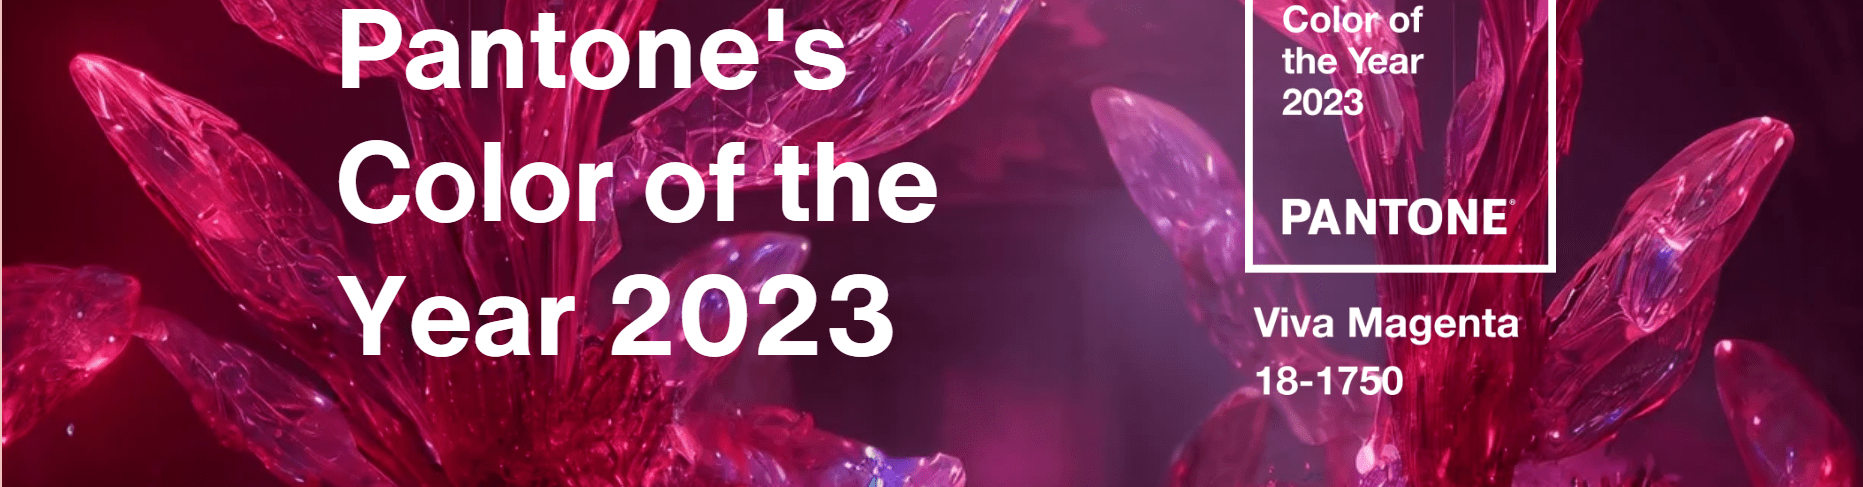 Holiday visual merchandizing trends 2023 | Pantone Color of the Year